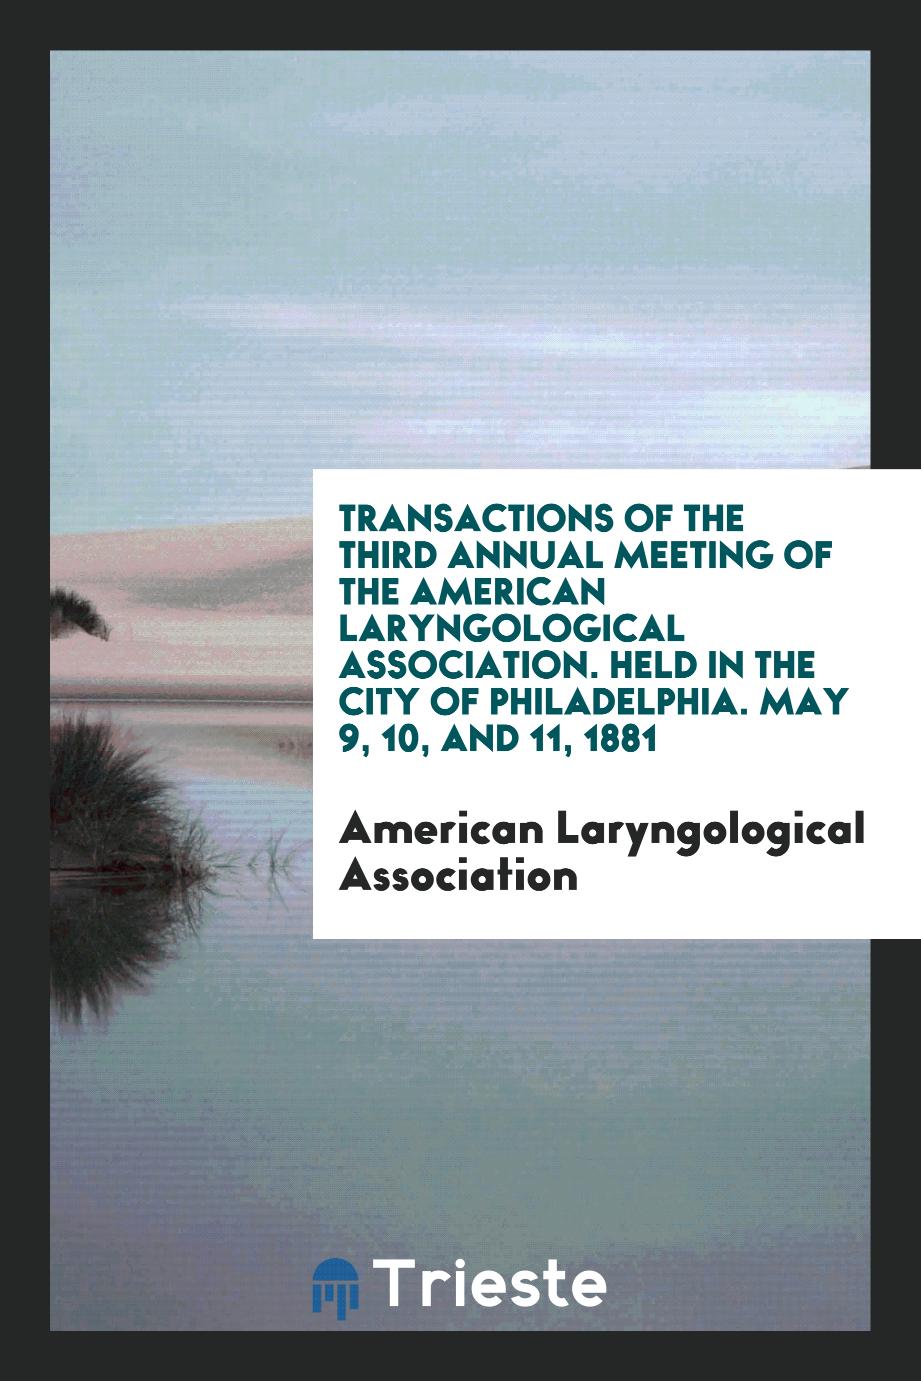 Transactions of the Third Annual Meeting of the American Laryngological Association. Held in the City of Philadelphia. May 9, 10, and 11, 1881